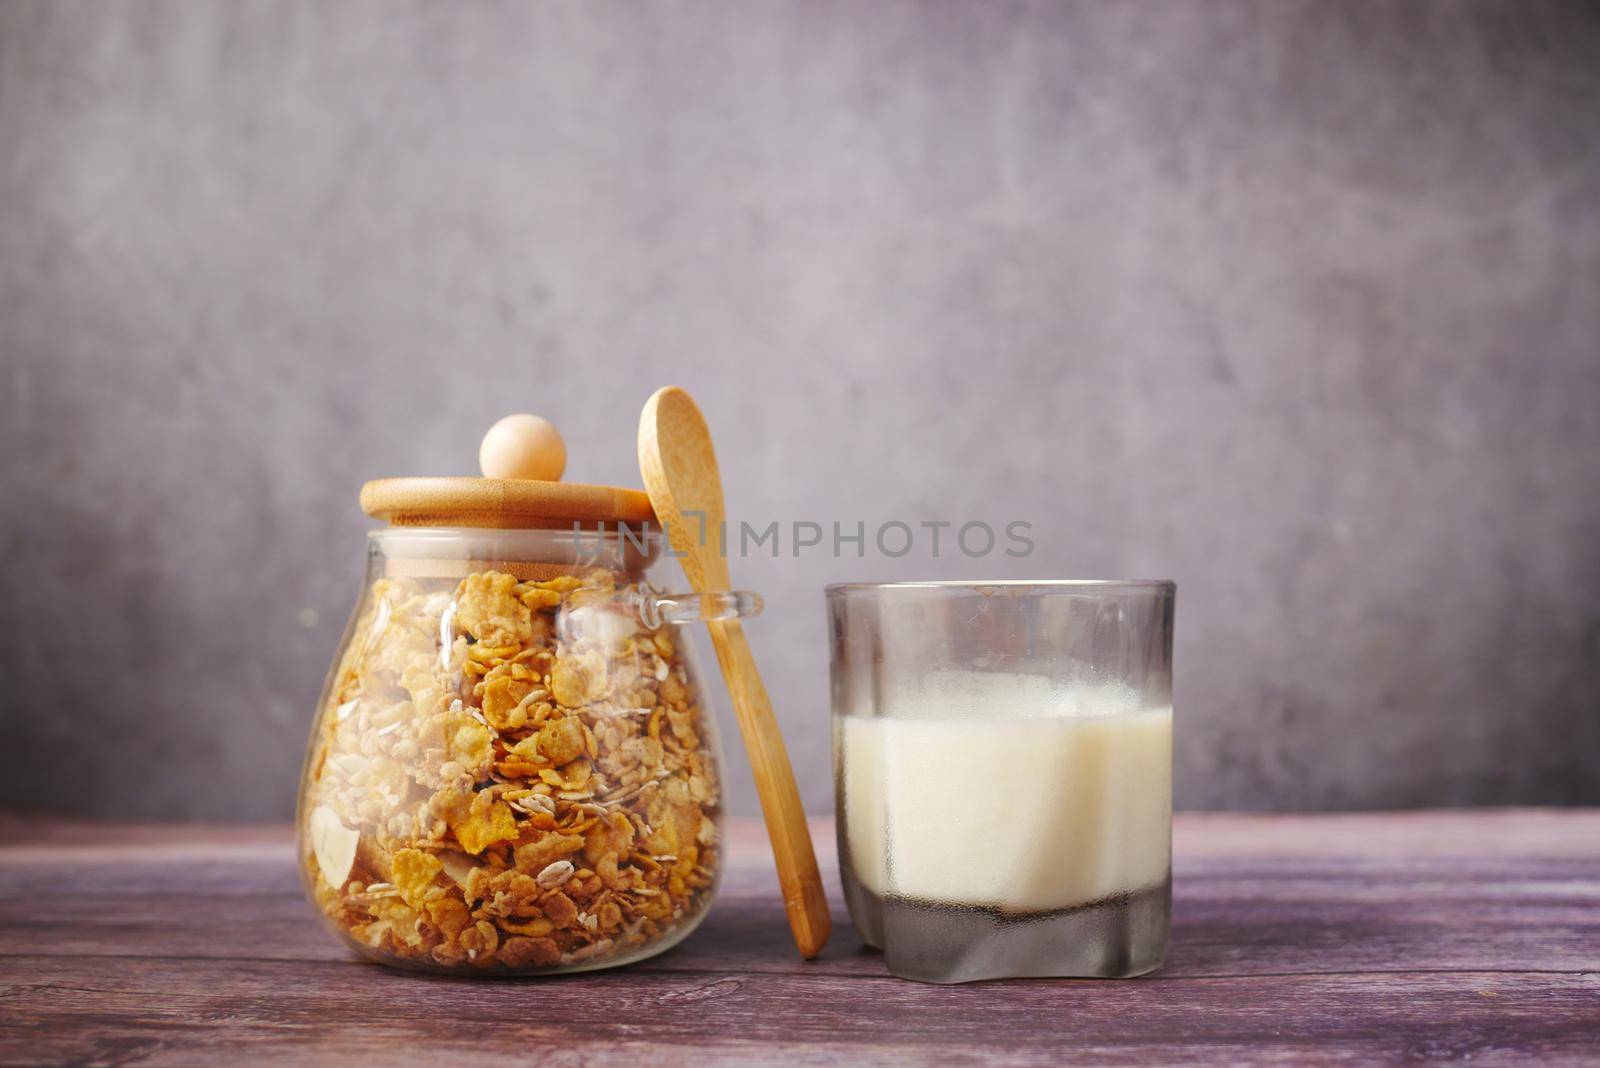 Home Made Musli in a bowl and glass of milk on black, by towfiq007